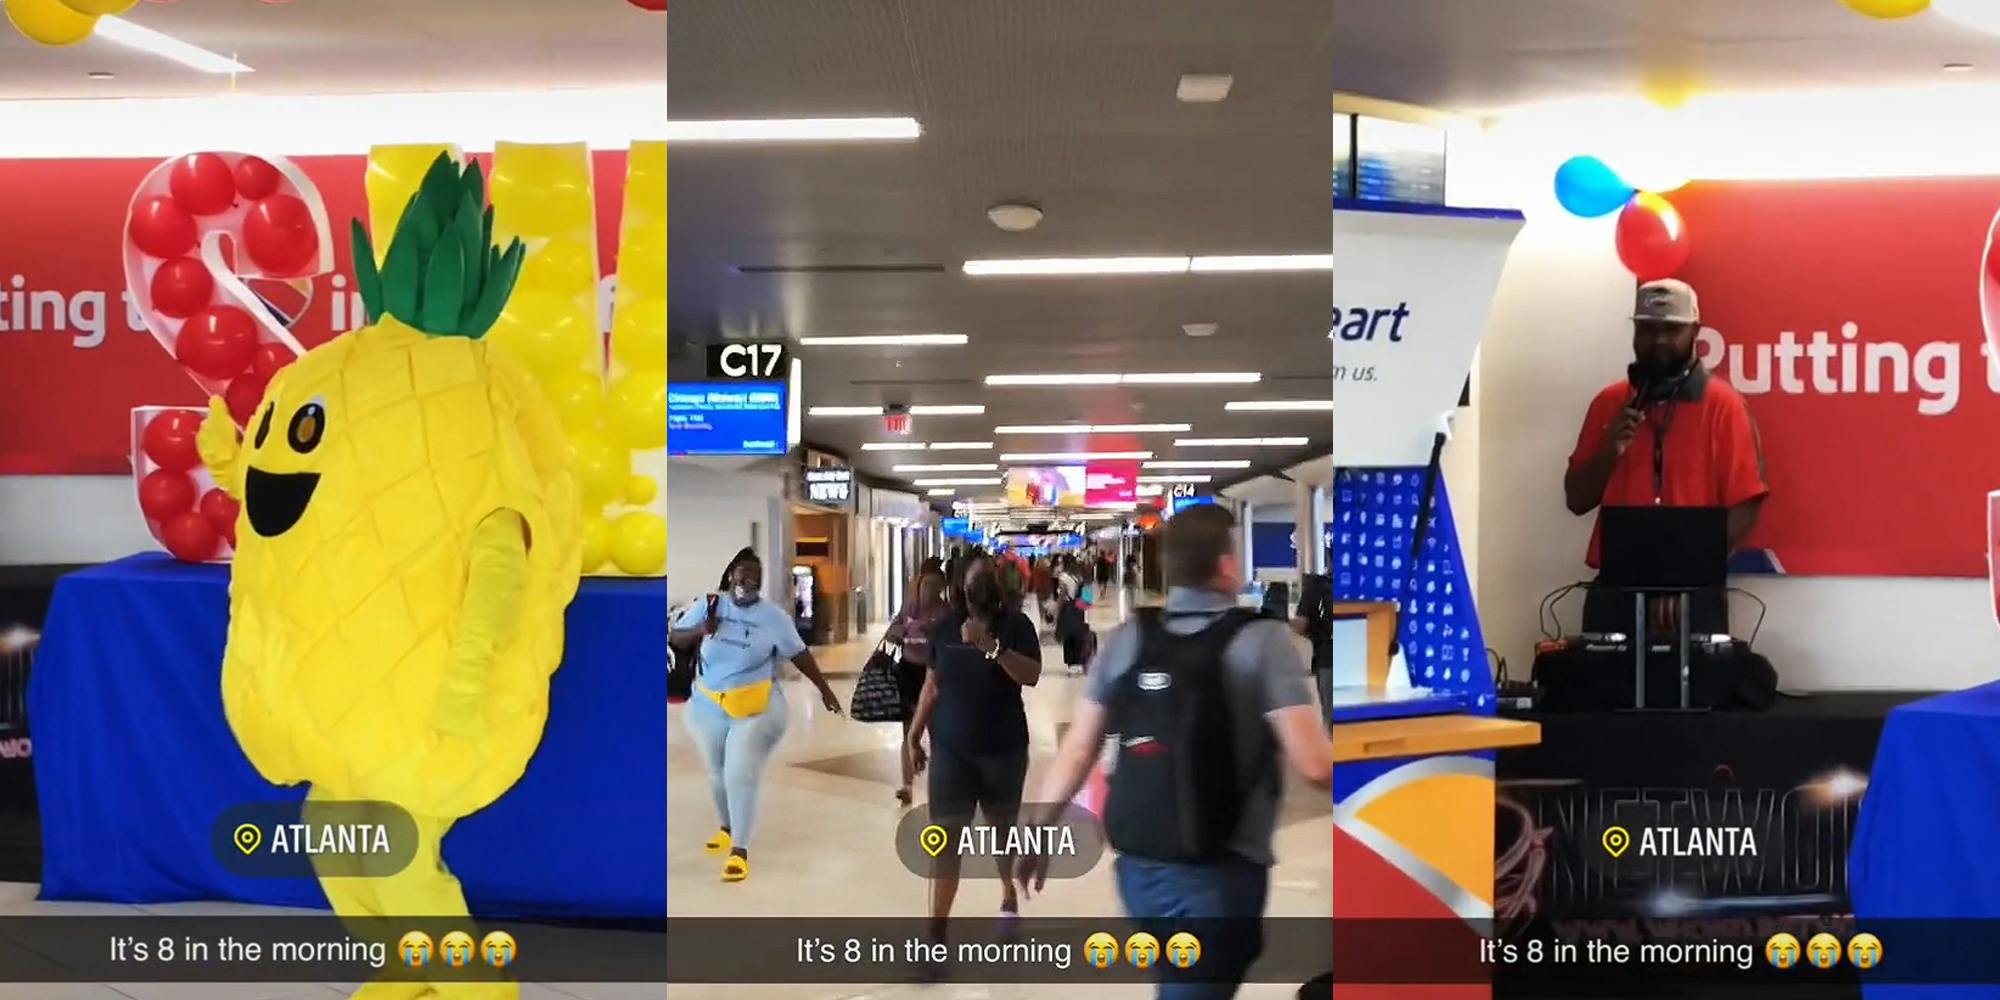 hired person dancing in pineapple costume caption "ATLANTA It's 8 in the morning" (l) people walking in airport caption "ATLANTA It's 8 in the morning" (c) hired DJ preforming at airport caption "ATLANTA It's 8 in the morning" (r)